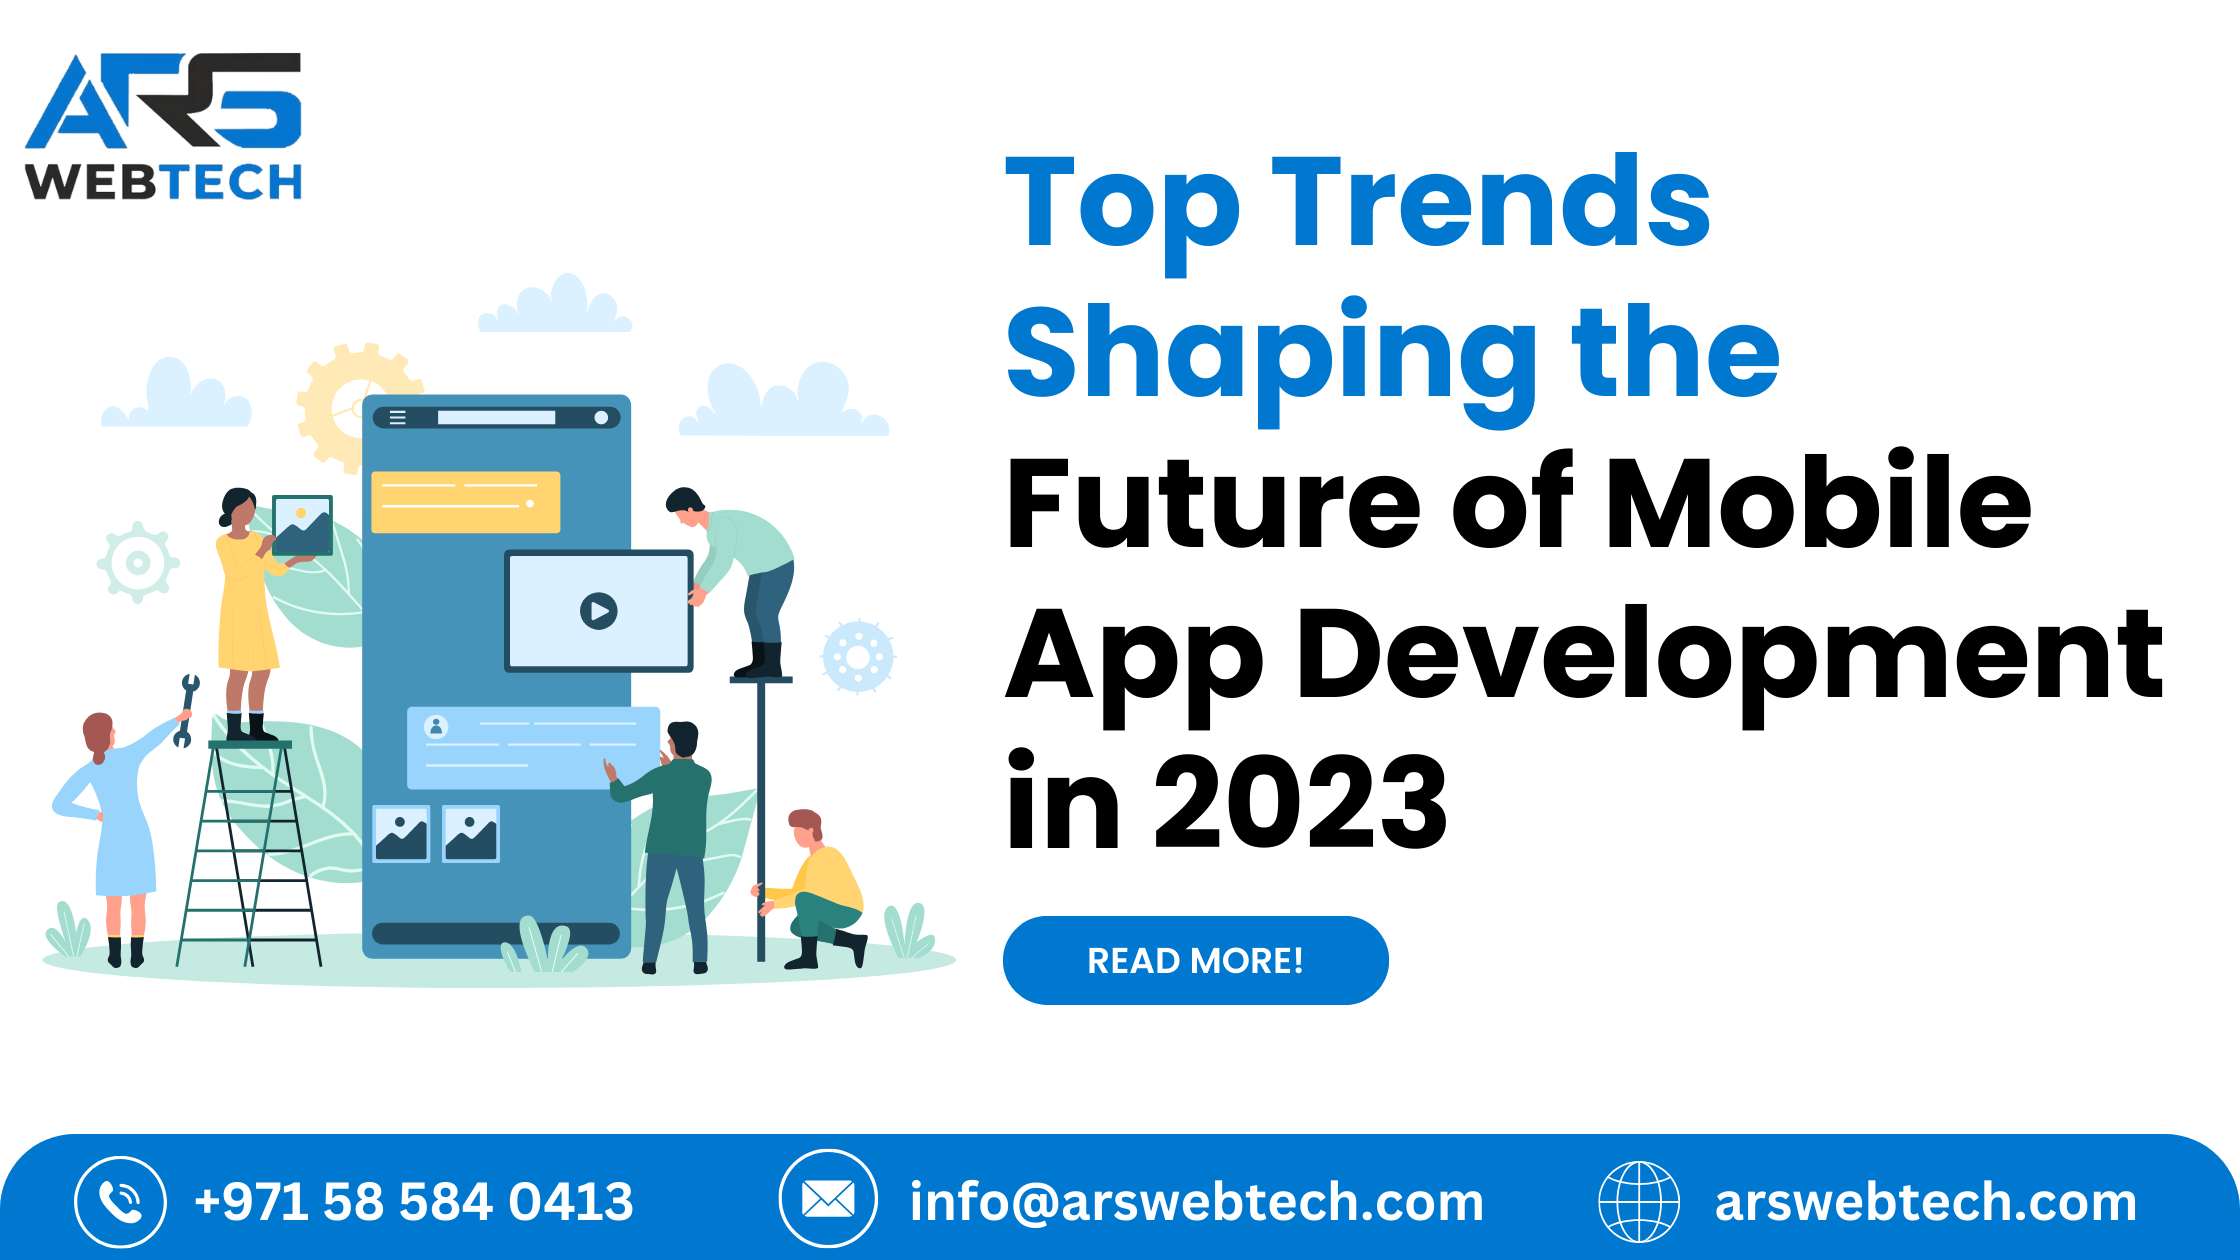 Top Trends Shaping the Future of Mobile App Development in 2023